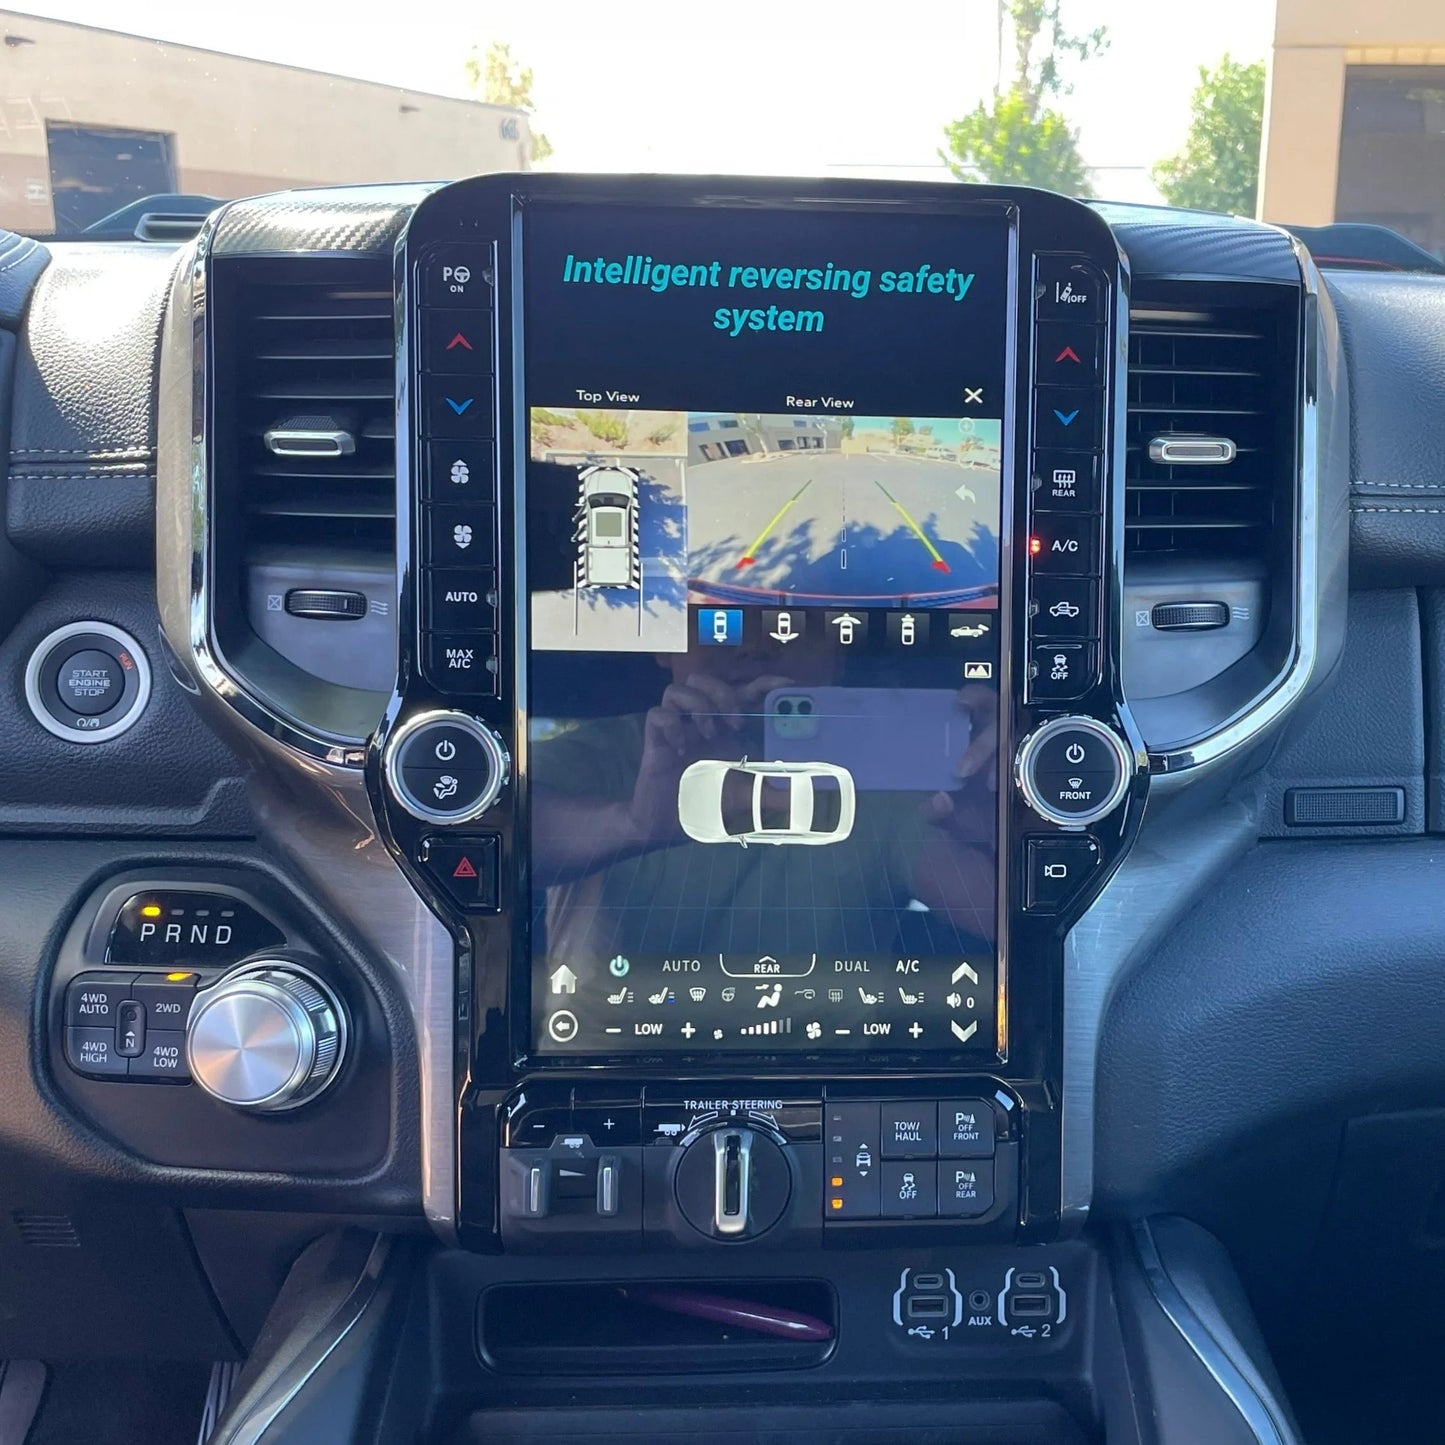 Dodge RAM 13.6” 7862 CarPlay Fast Boot Vertical Android Navigation Stereo 2019-21